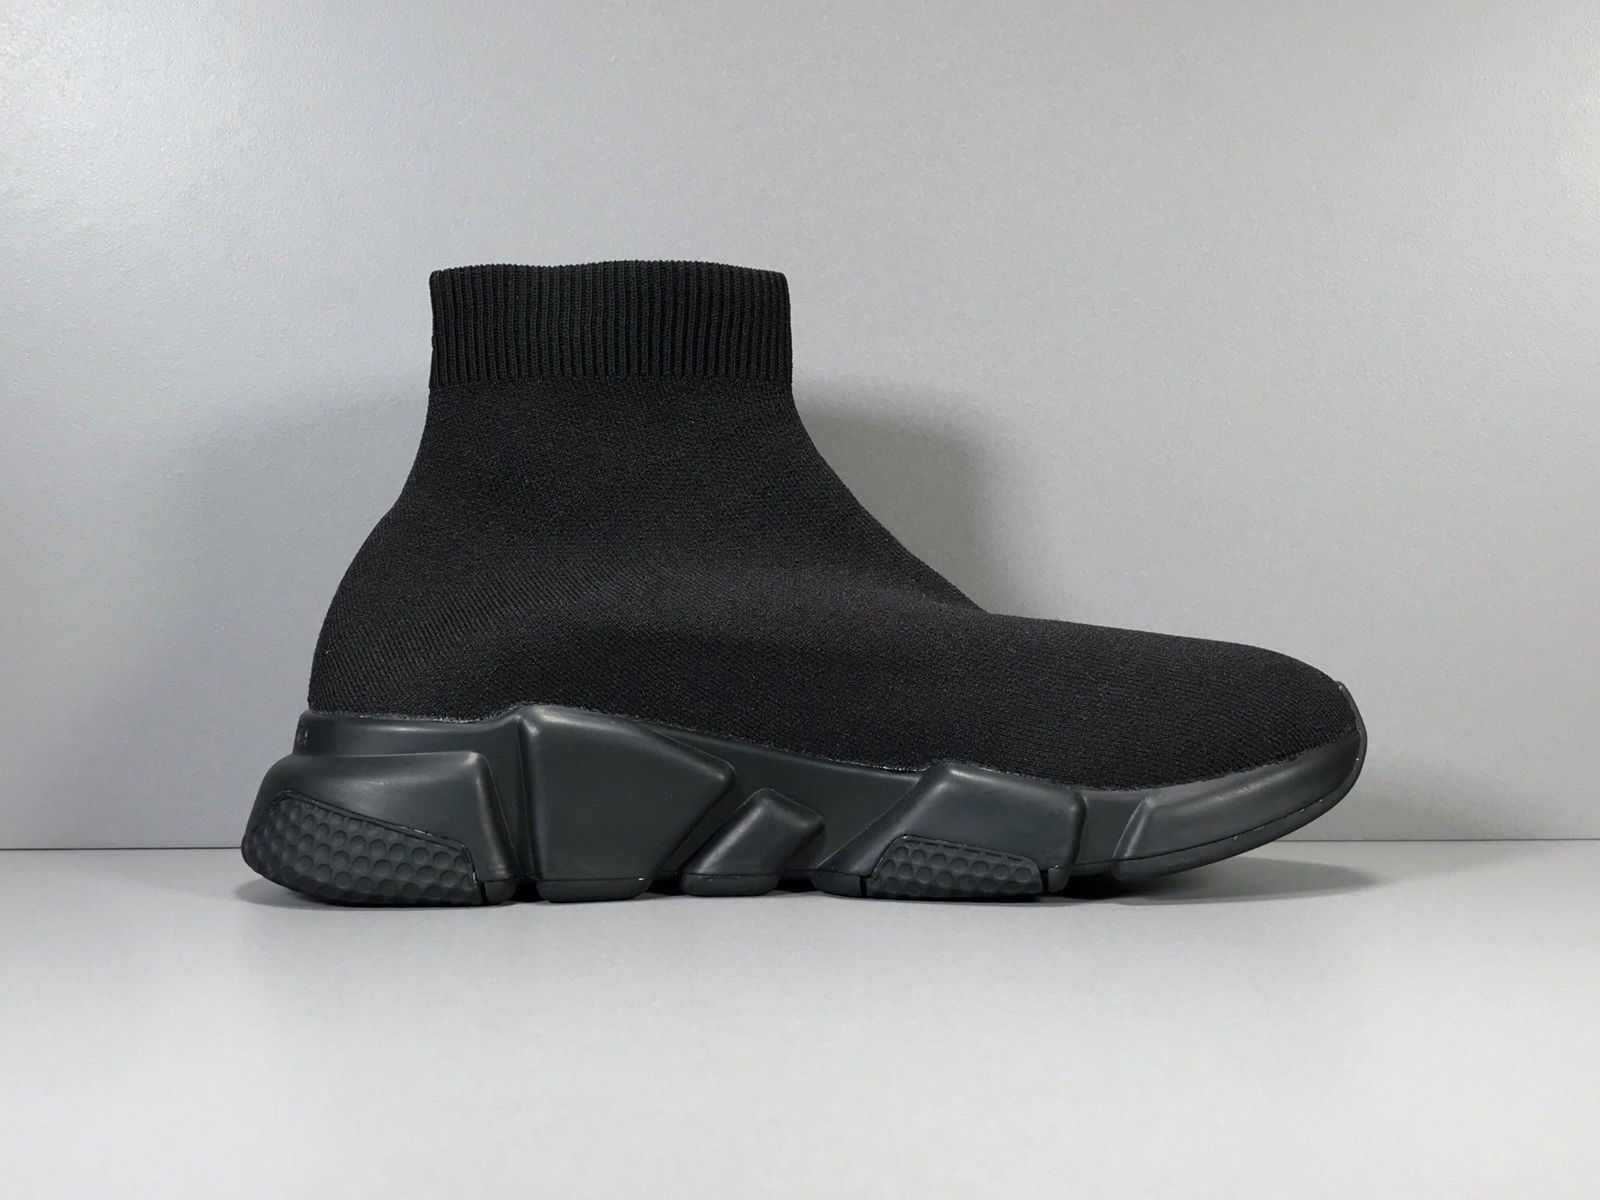            Speed slip on knitted mid top trainers Fashion            Knit boots 2